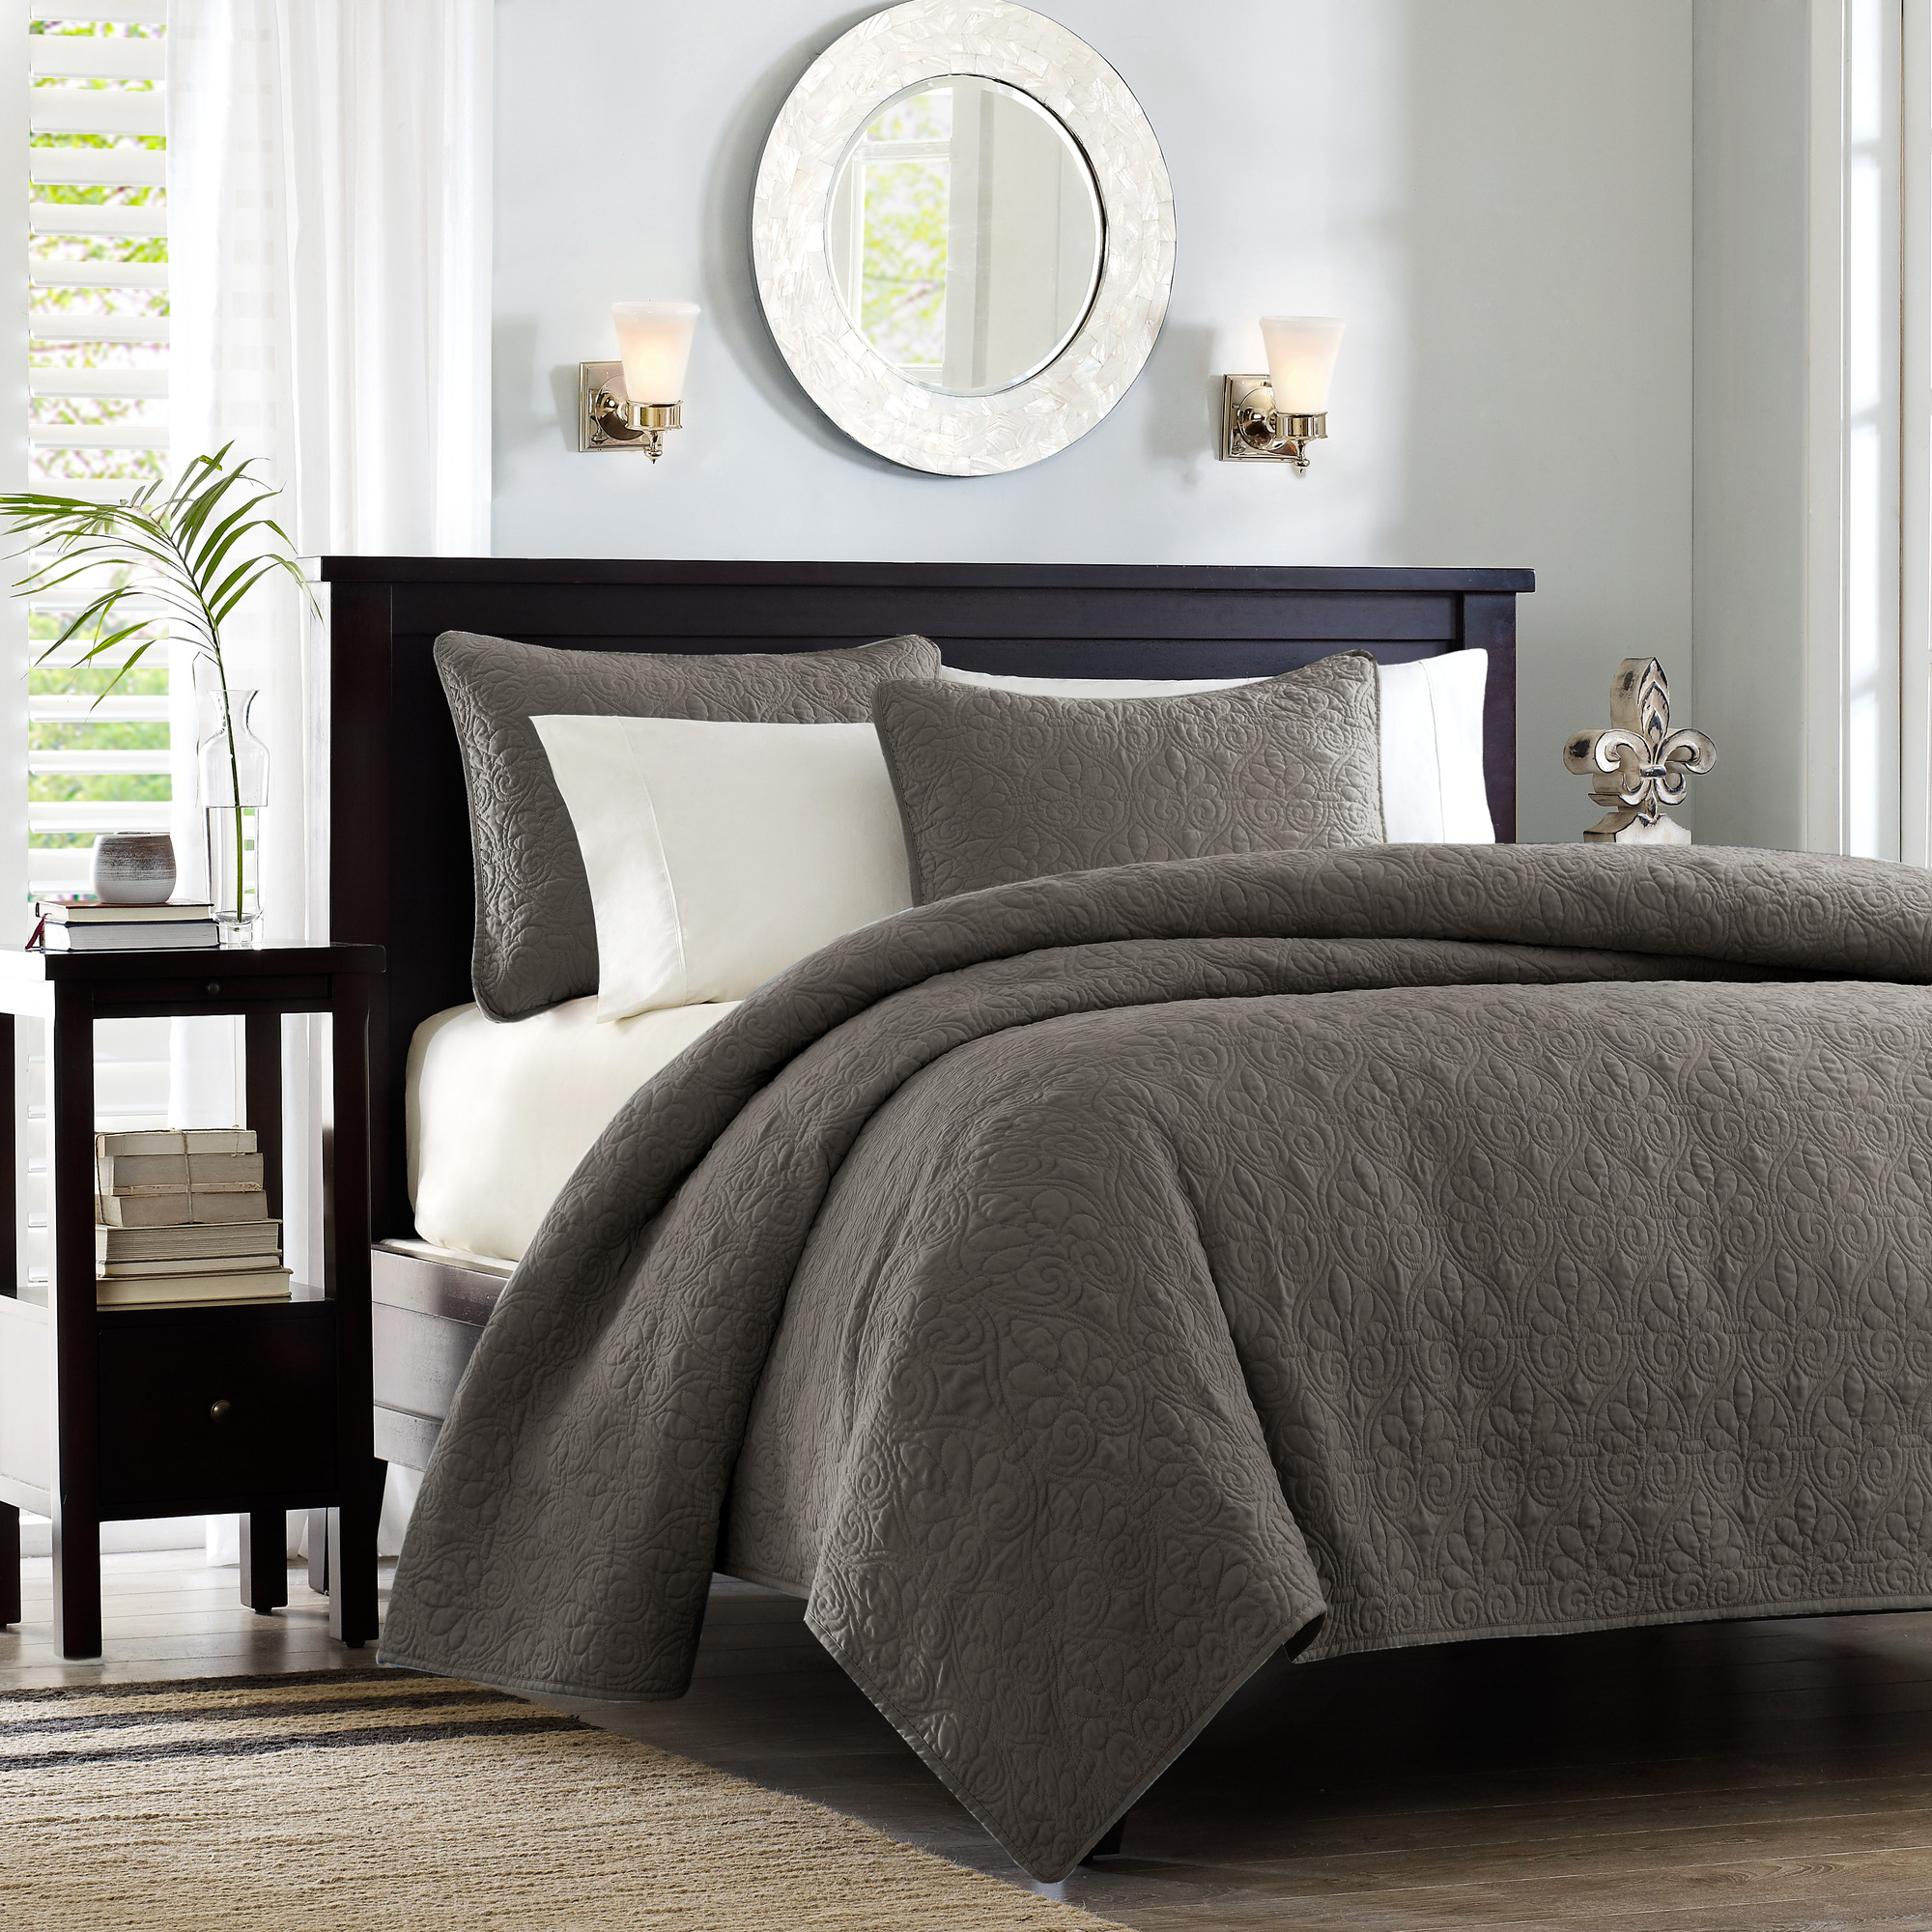 Home Essence Vancouver Super Soft Reversible Coverlet Set, Full/Queen, Dark Grey - image 1 of 13